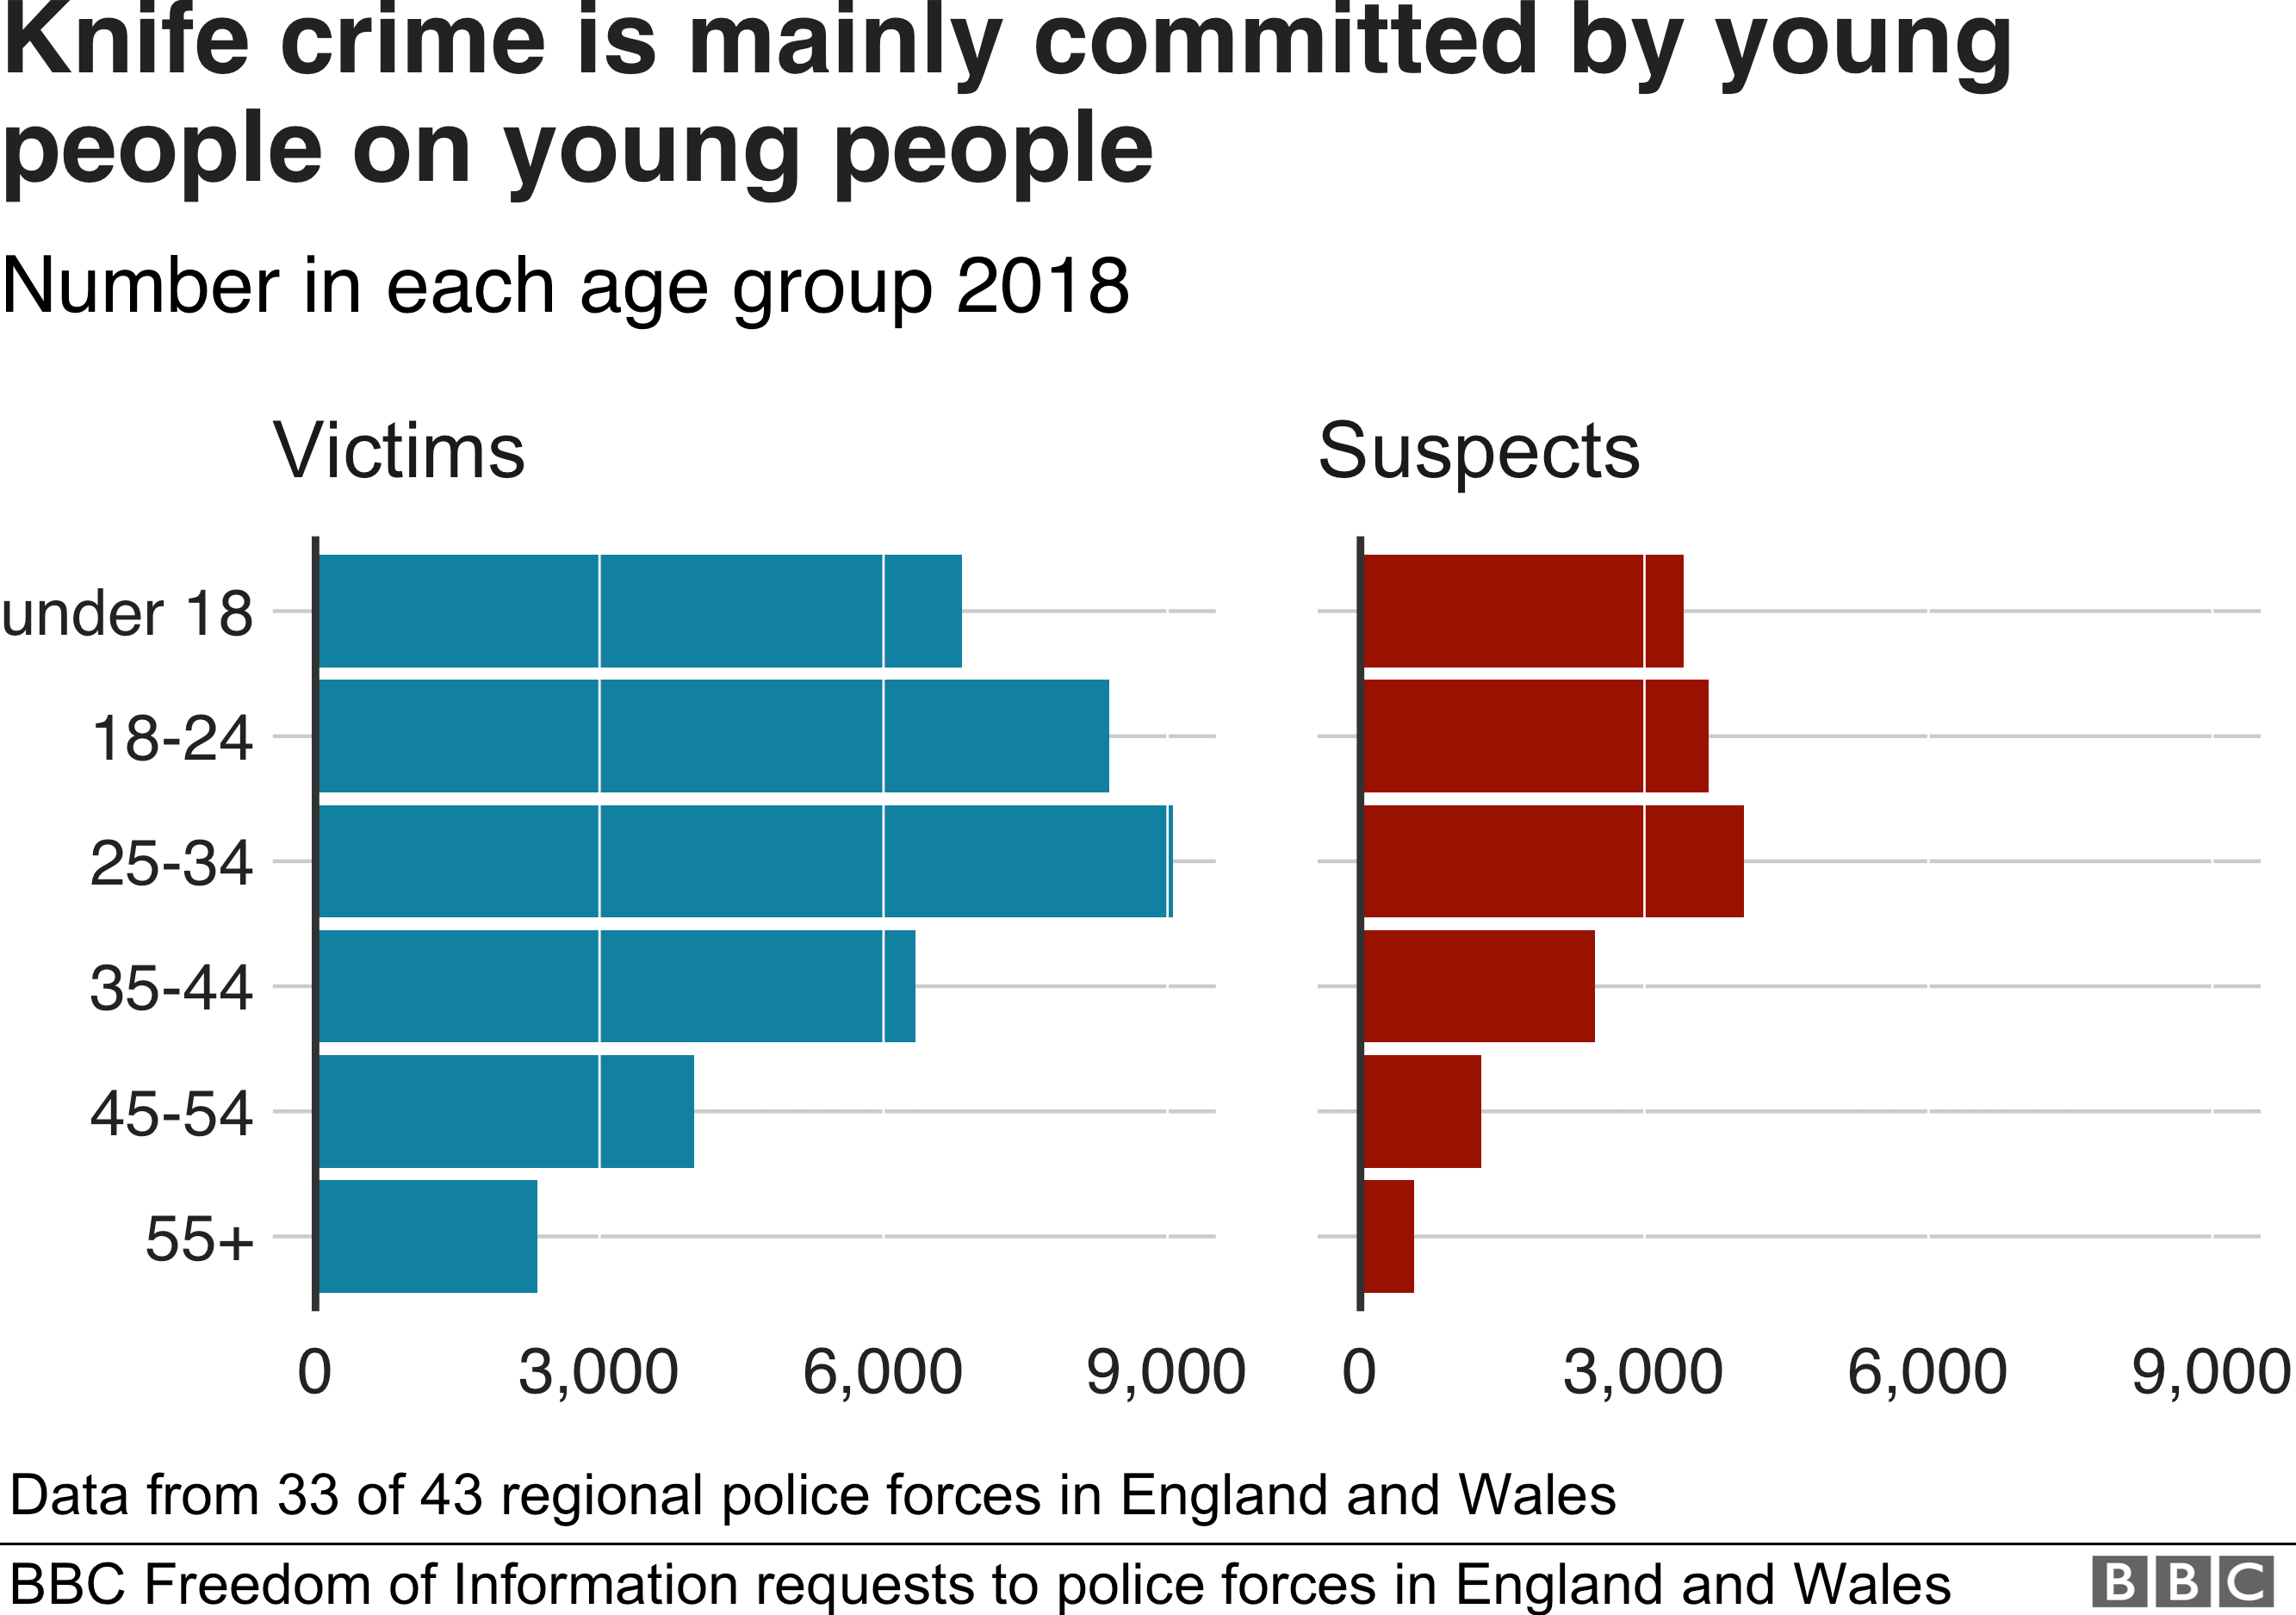 Knife crime victims are mainly under 35. Perpetrators are also mainly under 35.